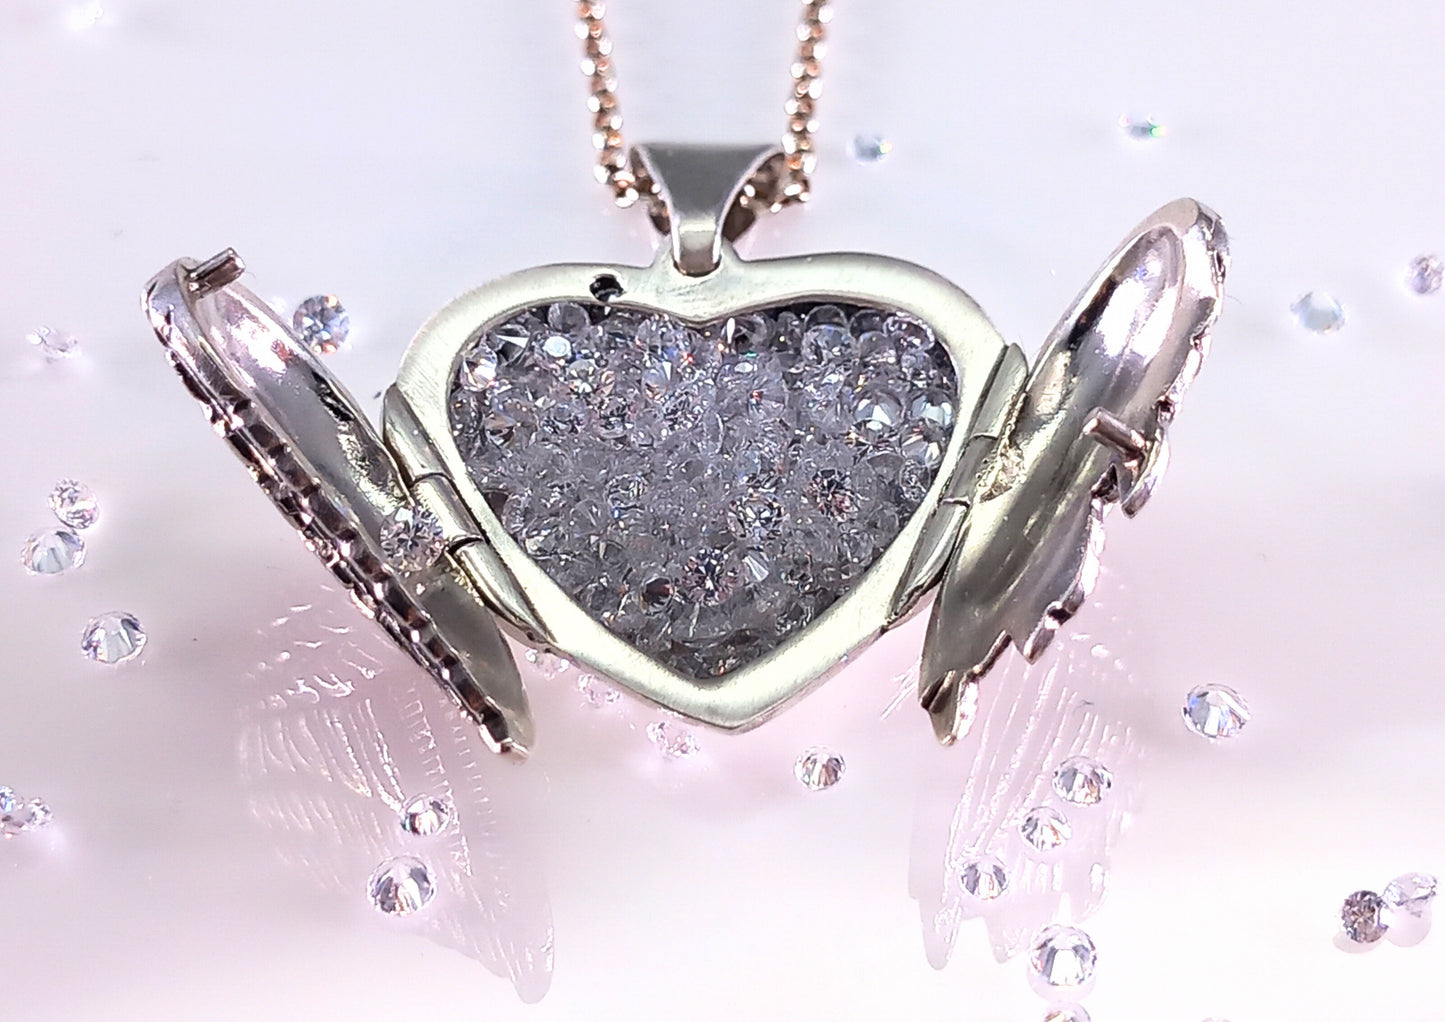 Breaking Waves Cremation Jewellery Angel Wings Heart Shape Sterling Silver Necklace with Cubic Zirconia 